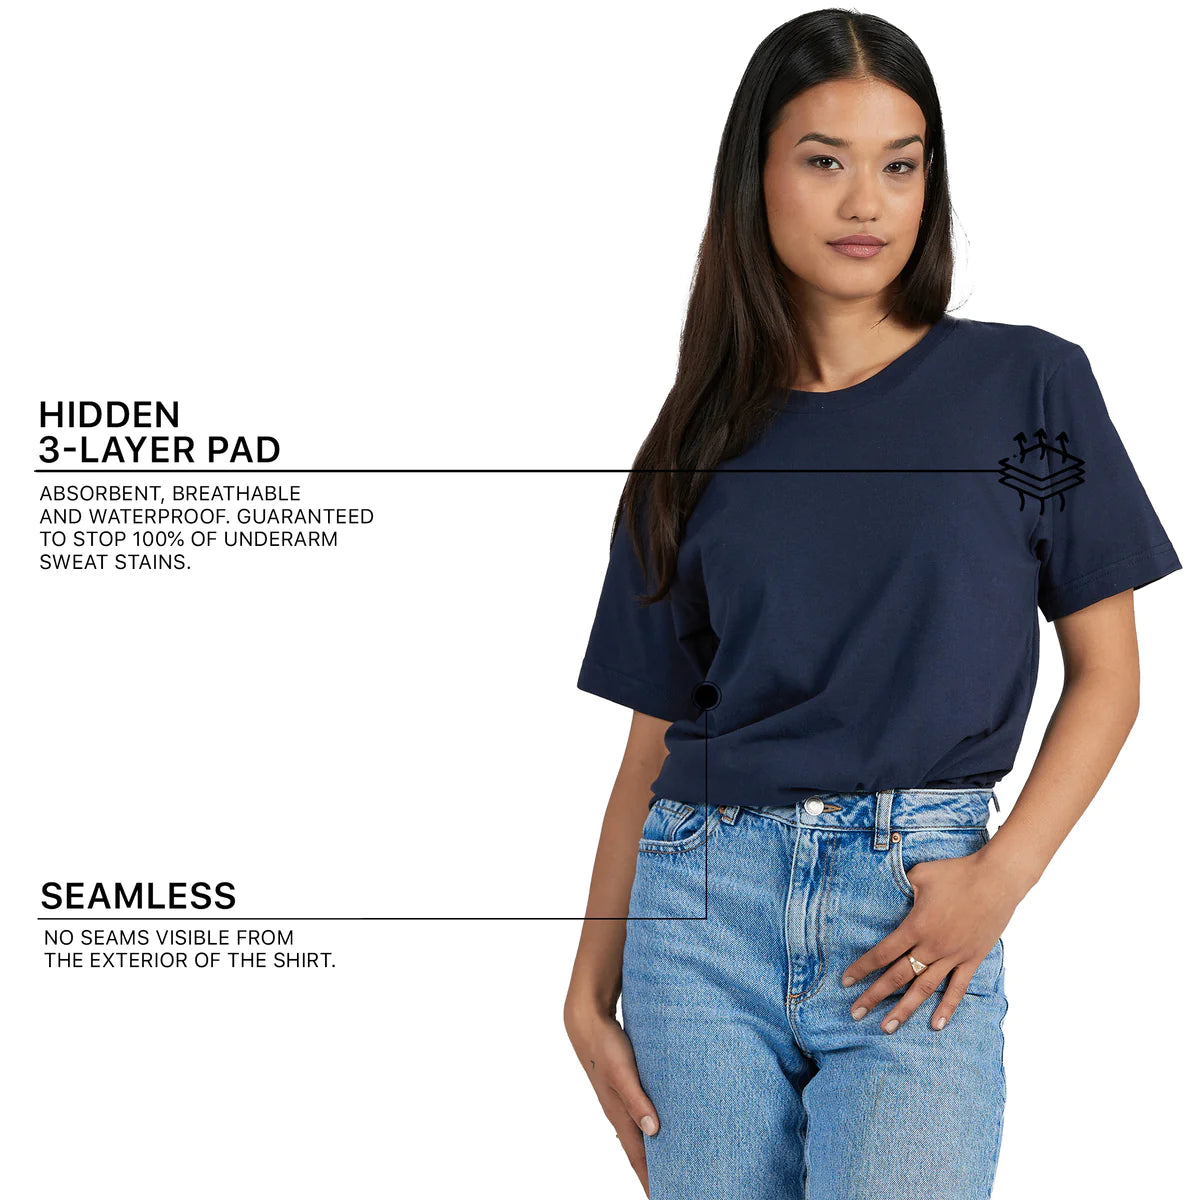 woman model in navy sweat proof shirt with infographic